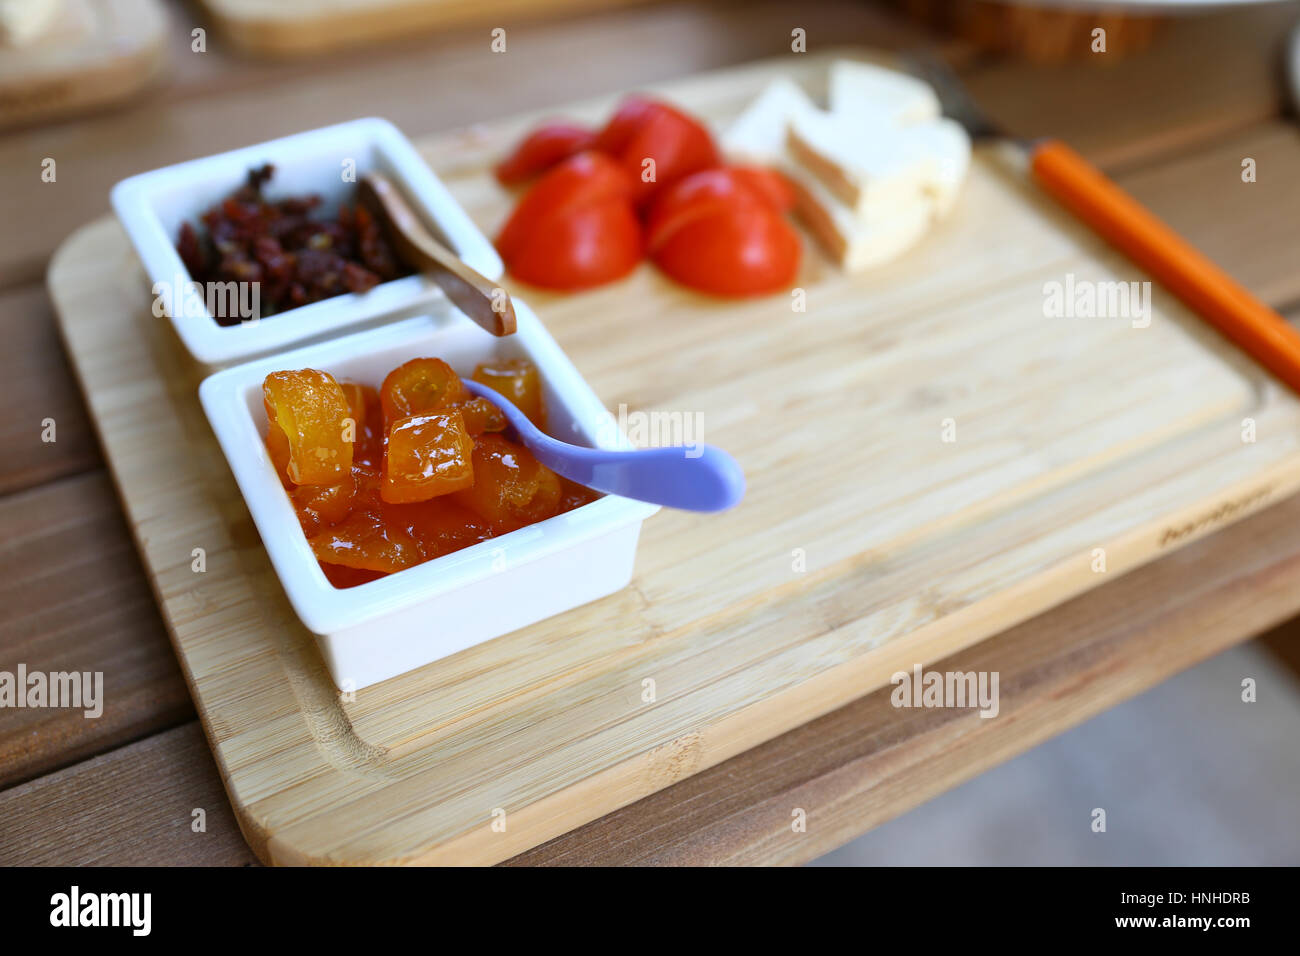 Closeup view of wooden breakfast plate with jam, cheese and tomato, copy space. Stock Photo